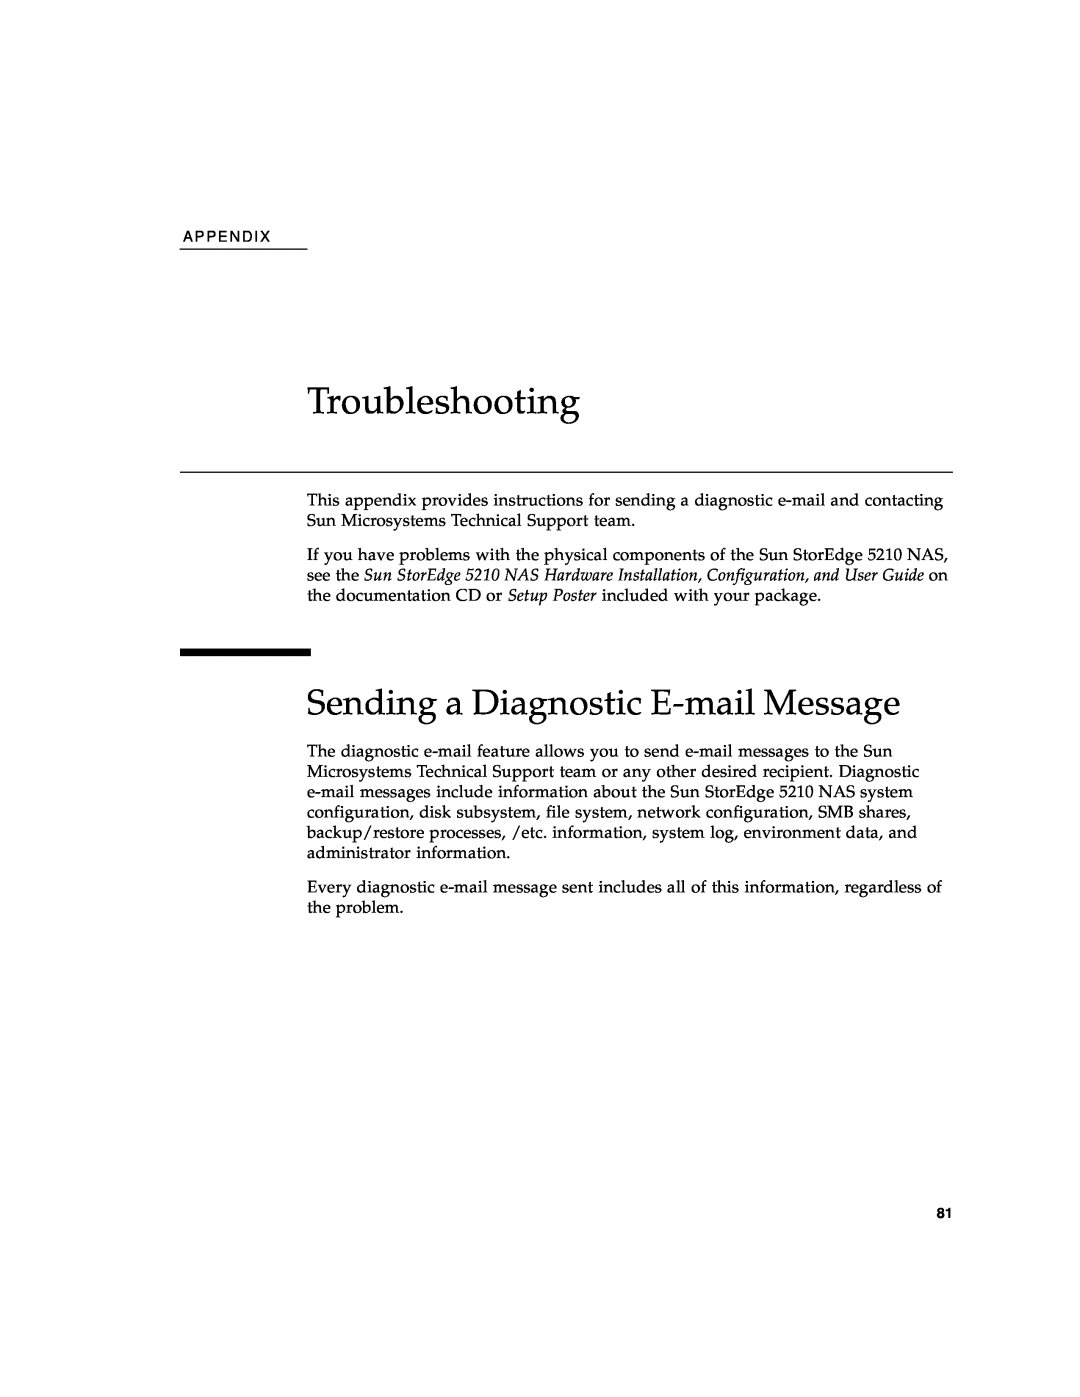 Sun Microsystems 5210 NAS manual Troubleshooting, Sending a Diagnostic E-mail Message 